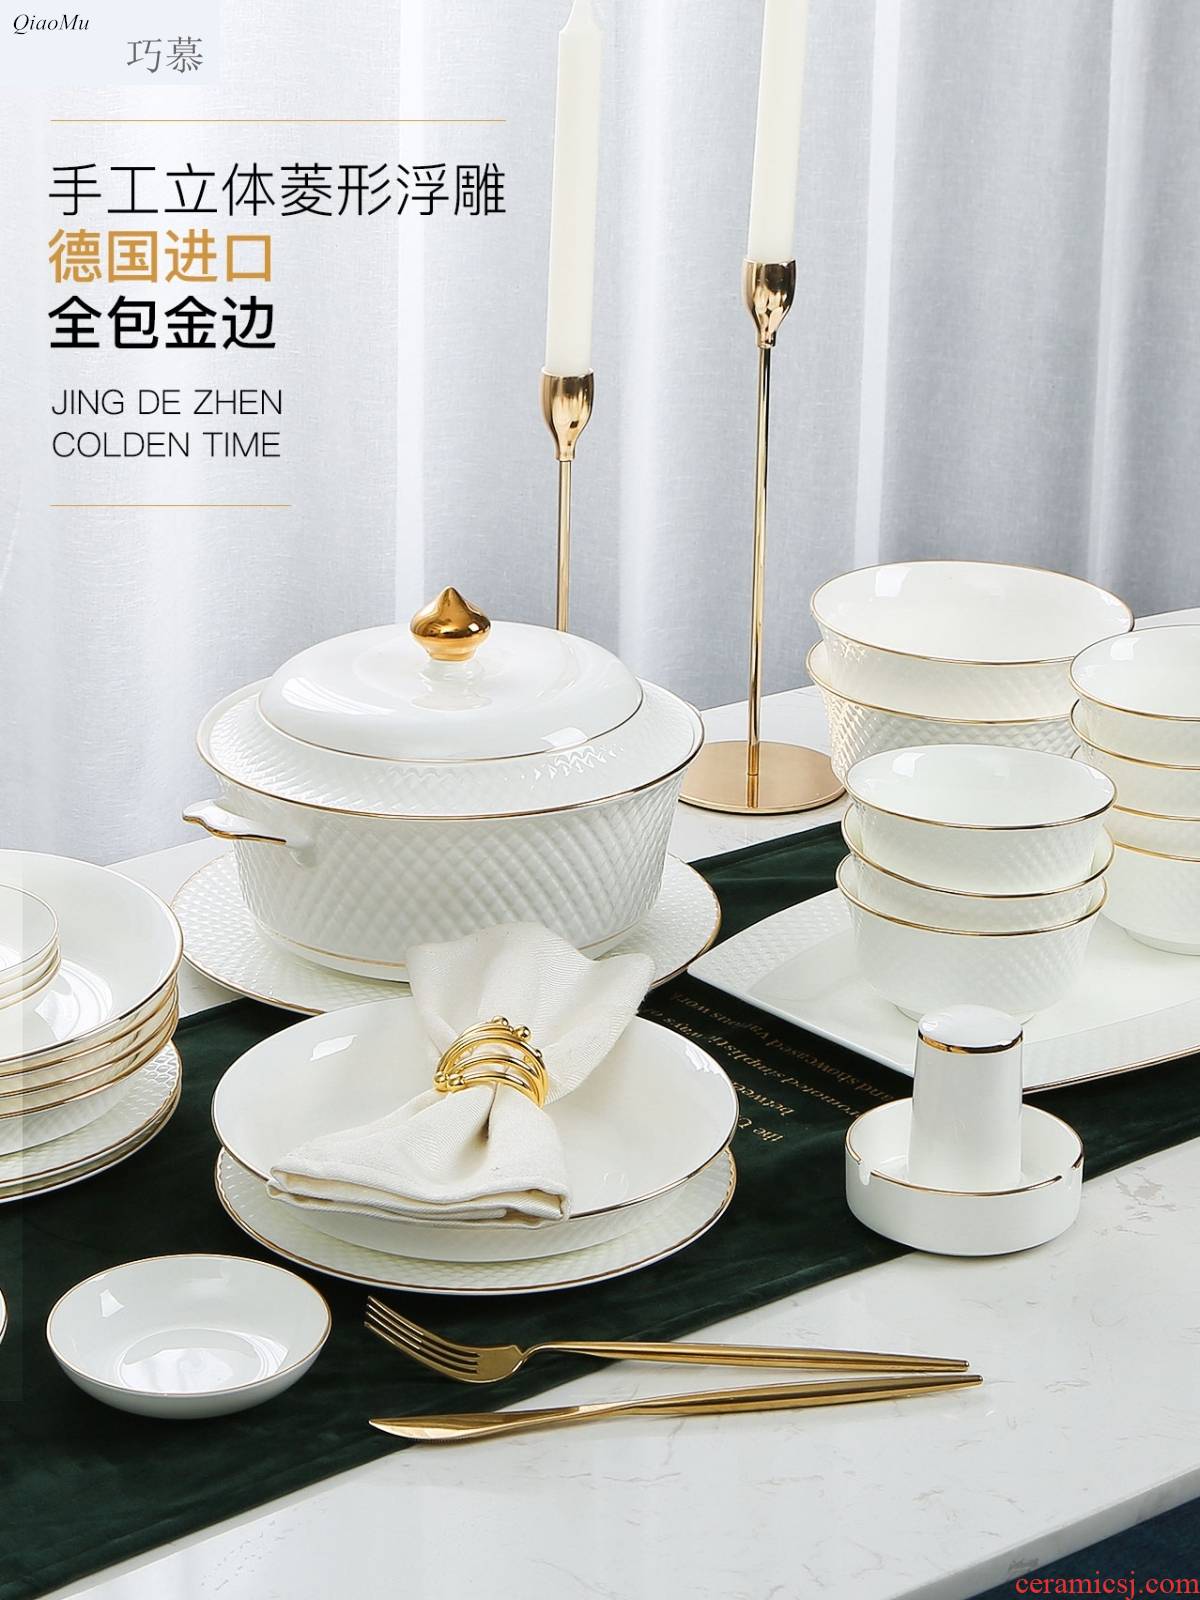 Qiao mu ou jingdezhen ceramic dishes suit household contracted and pure white ipads China tableware Jin Ling dishes chopsticks